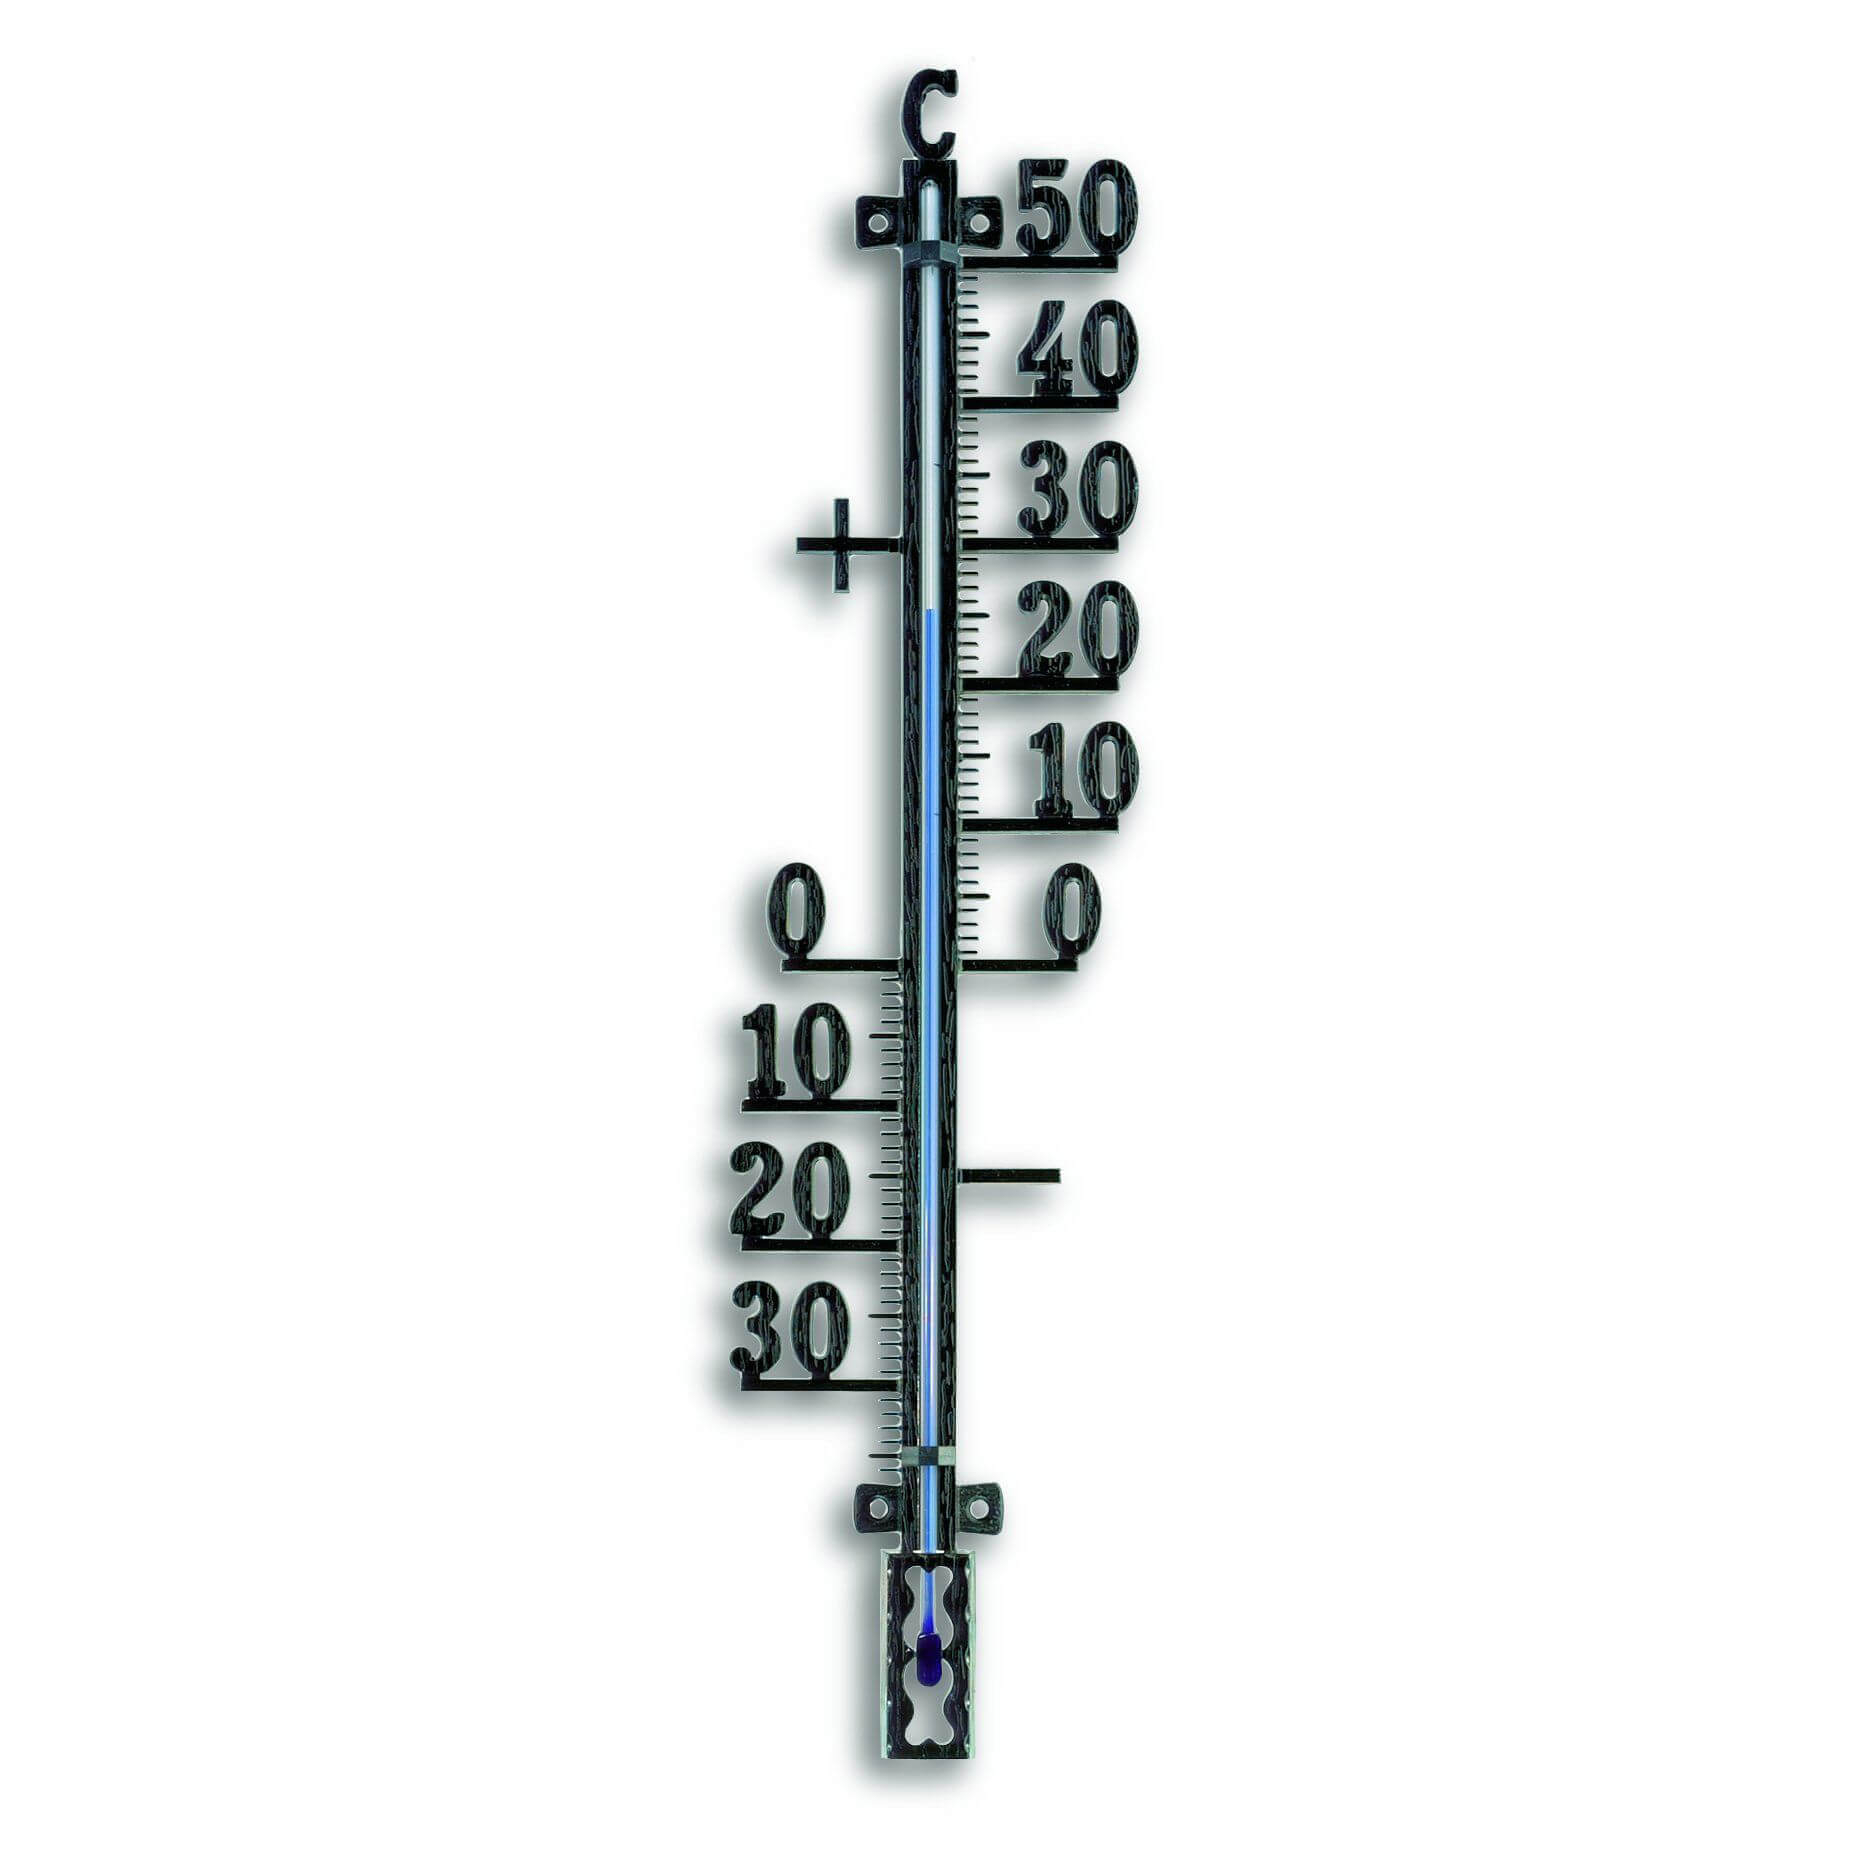 Large outdoor thermometers 2